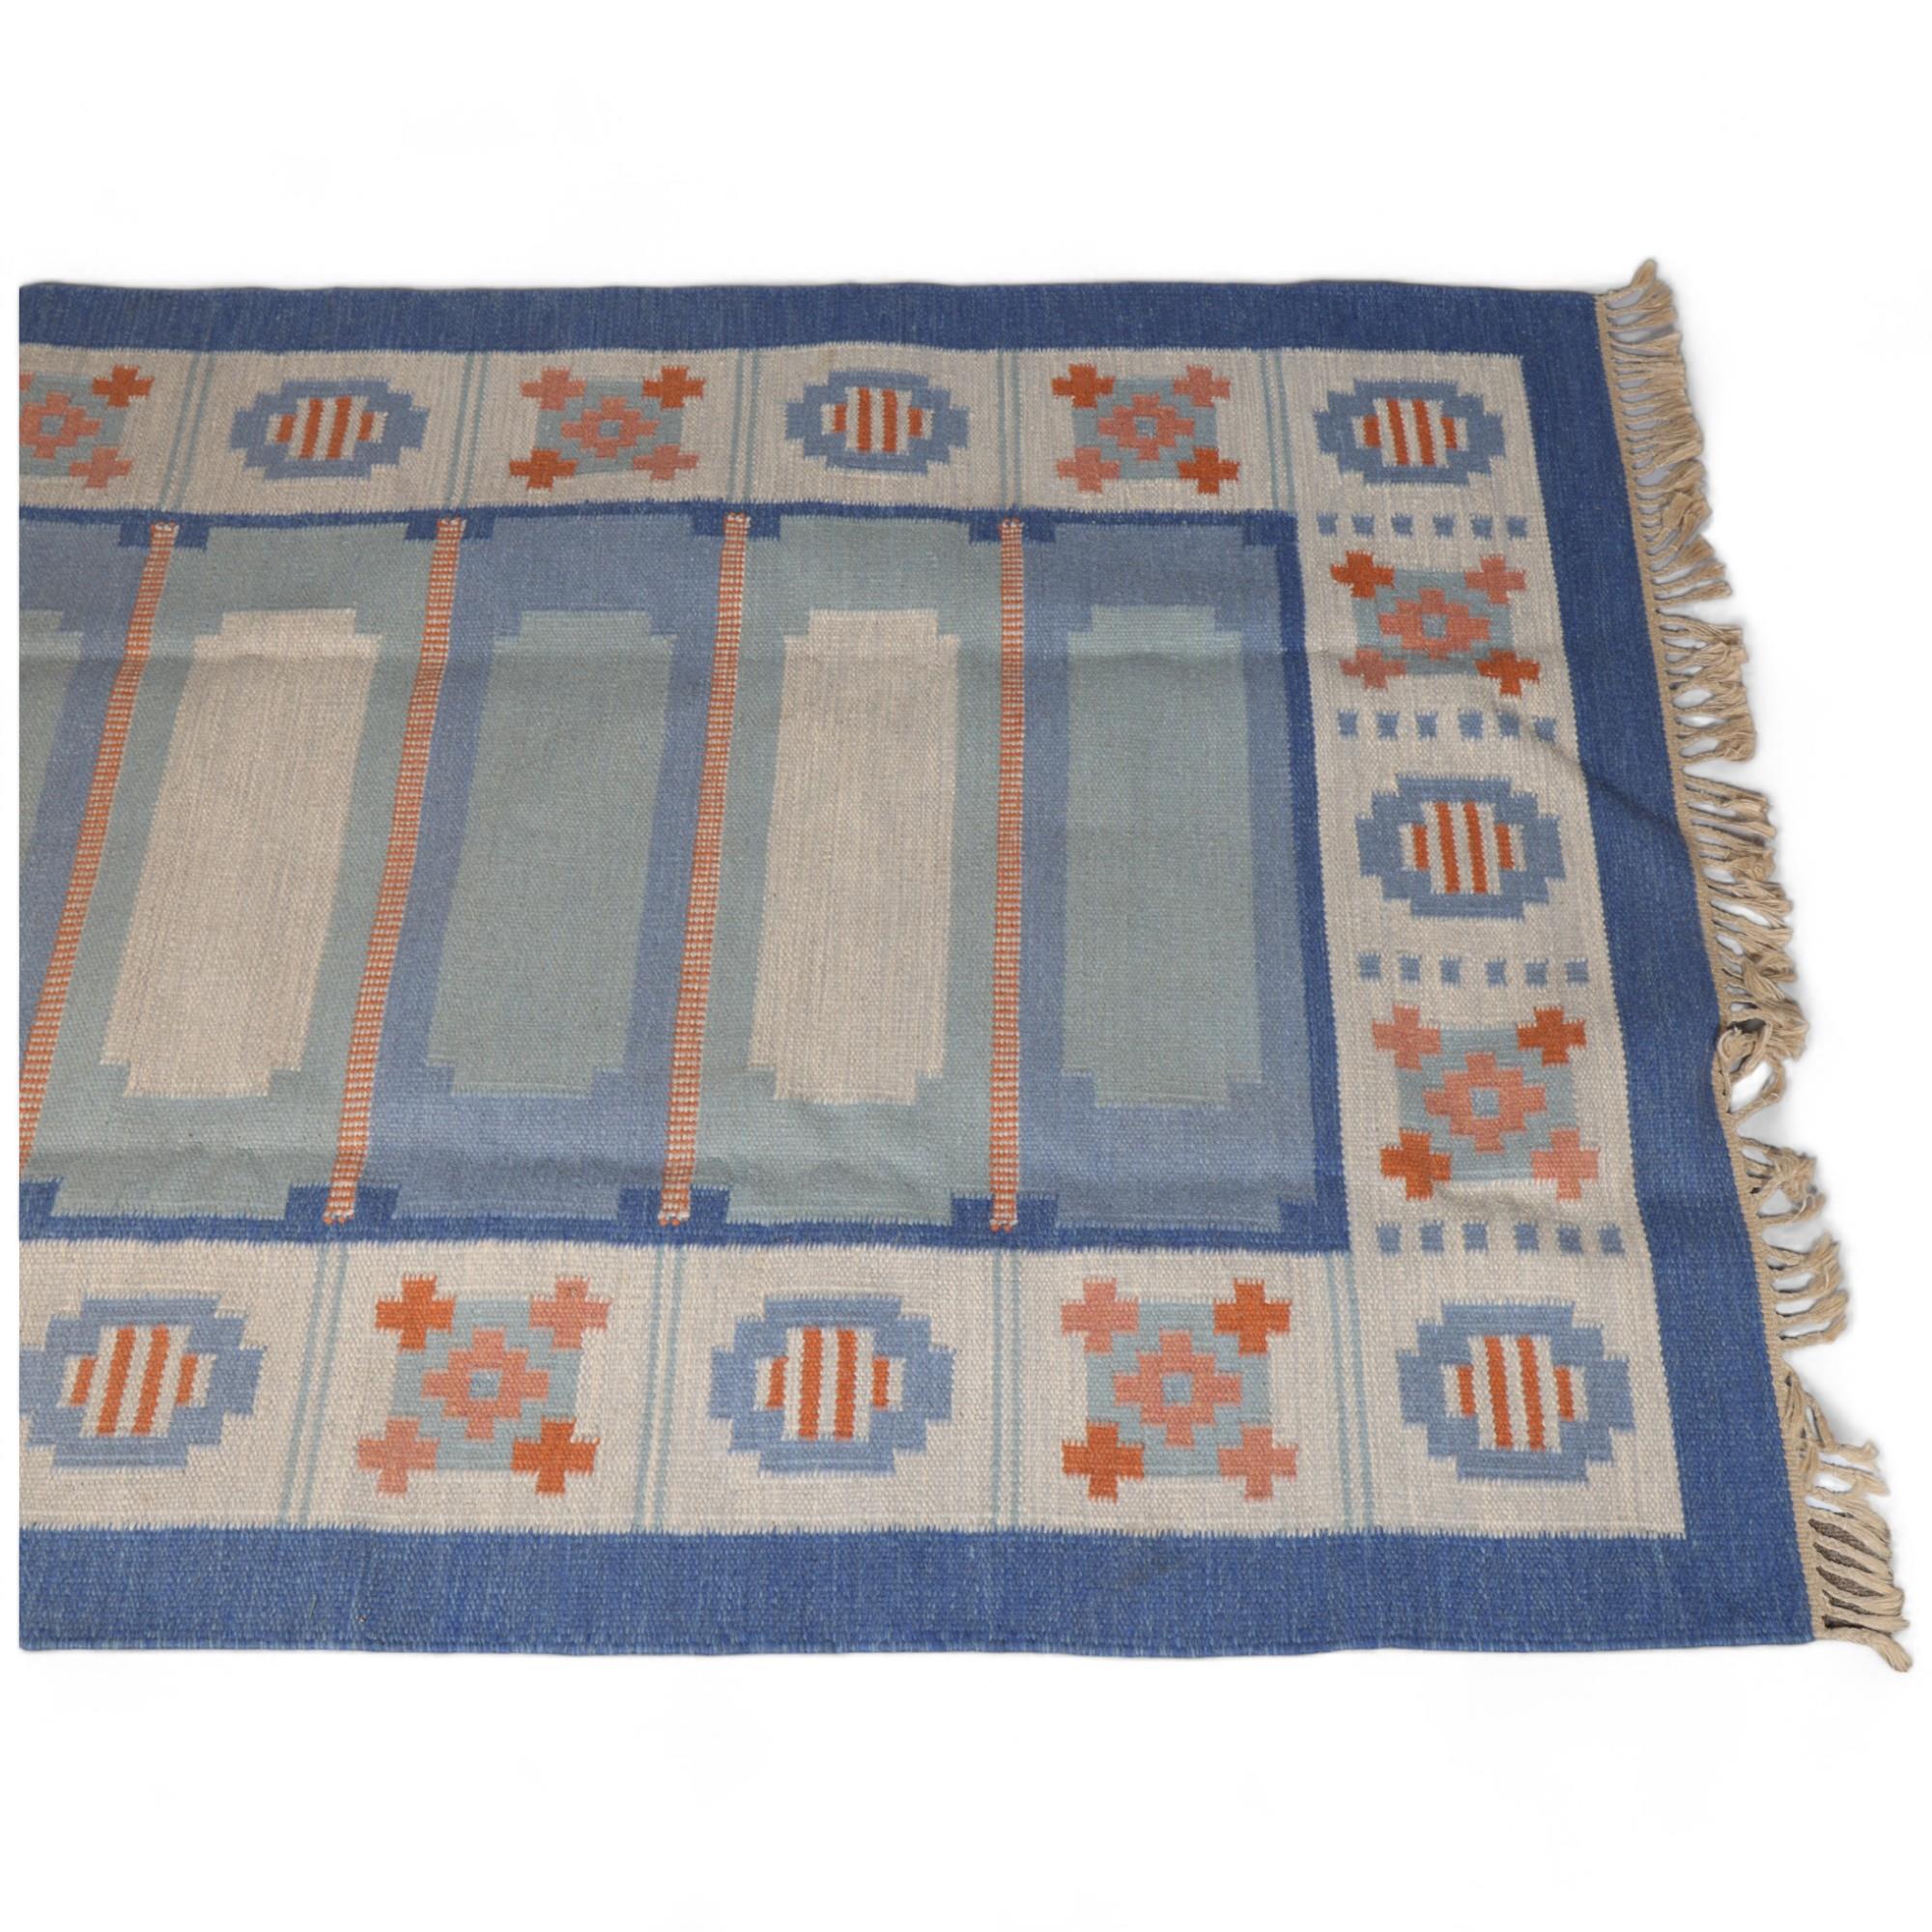 A Swedish flatweave rug, with a geometric pattern in shades of blue and dark pink, 205 X 140cms